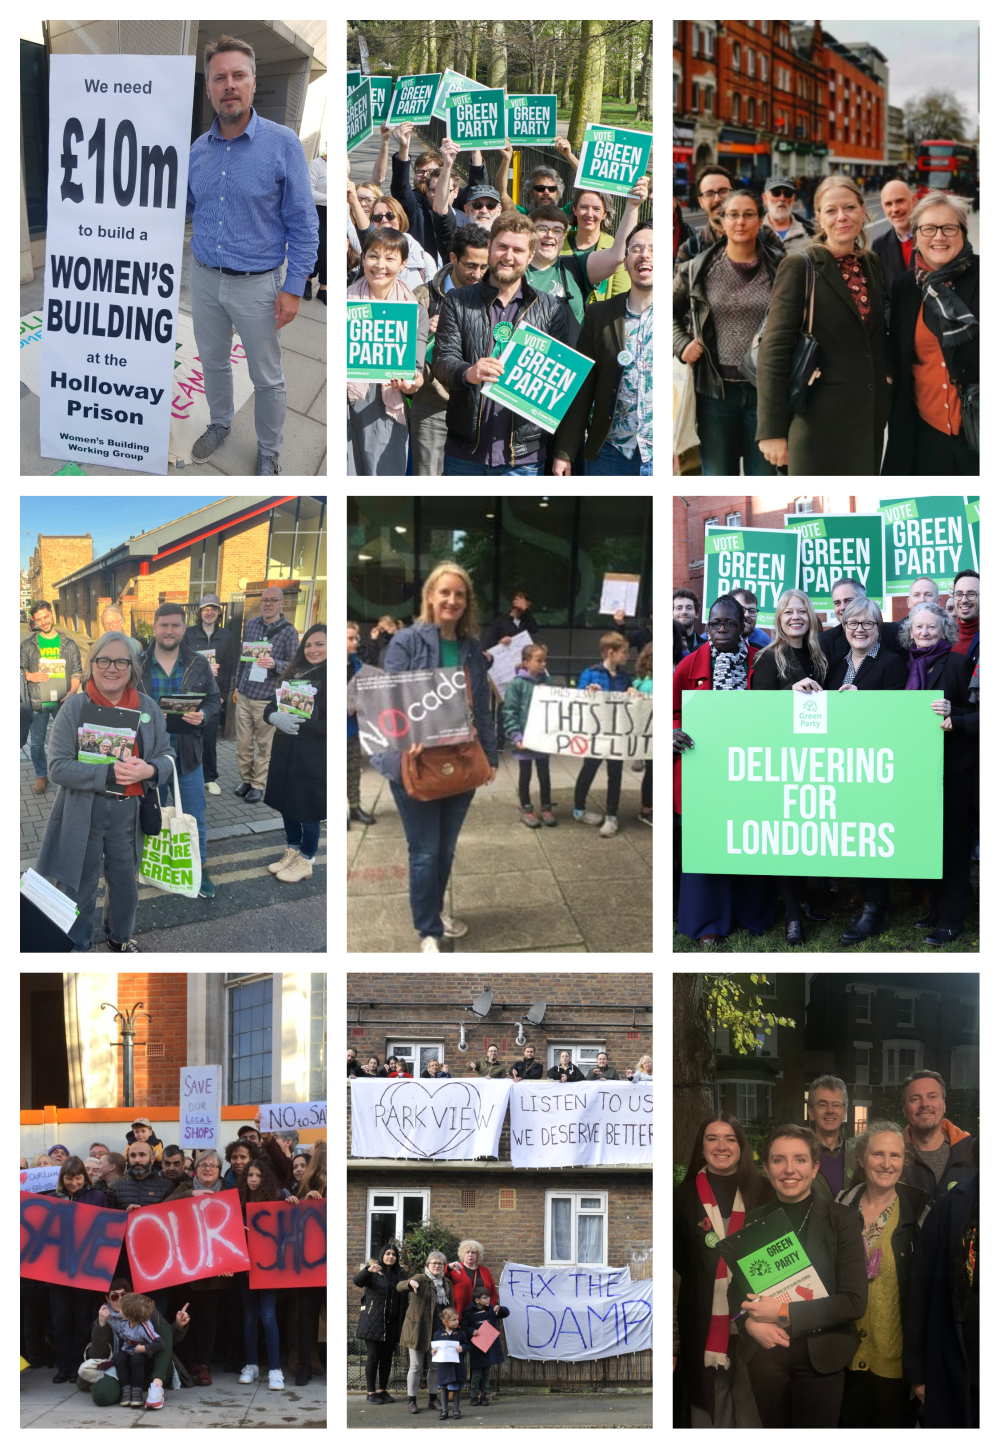 Collage of Greens campaigning